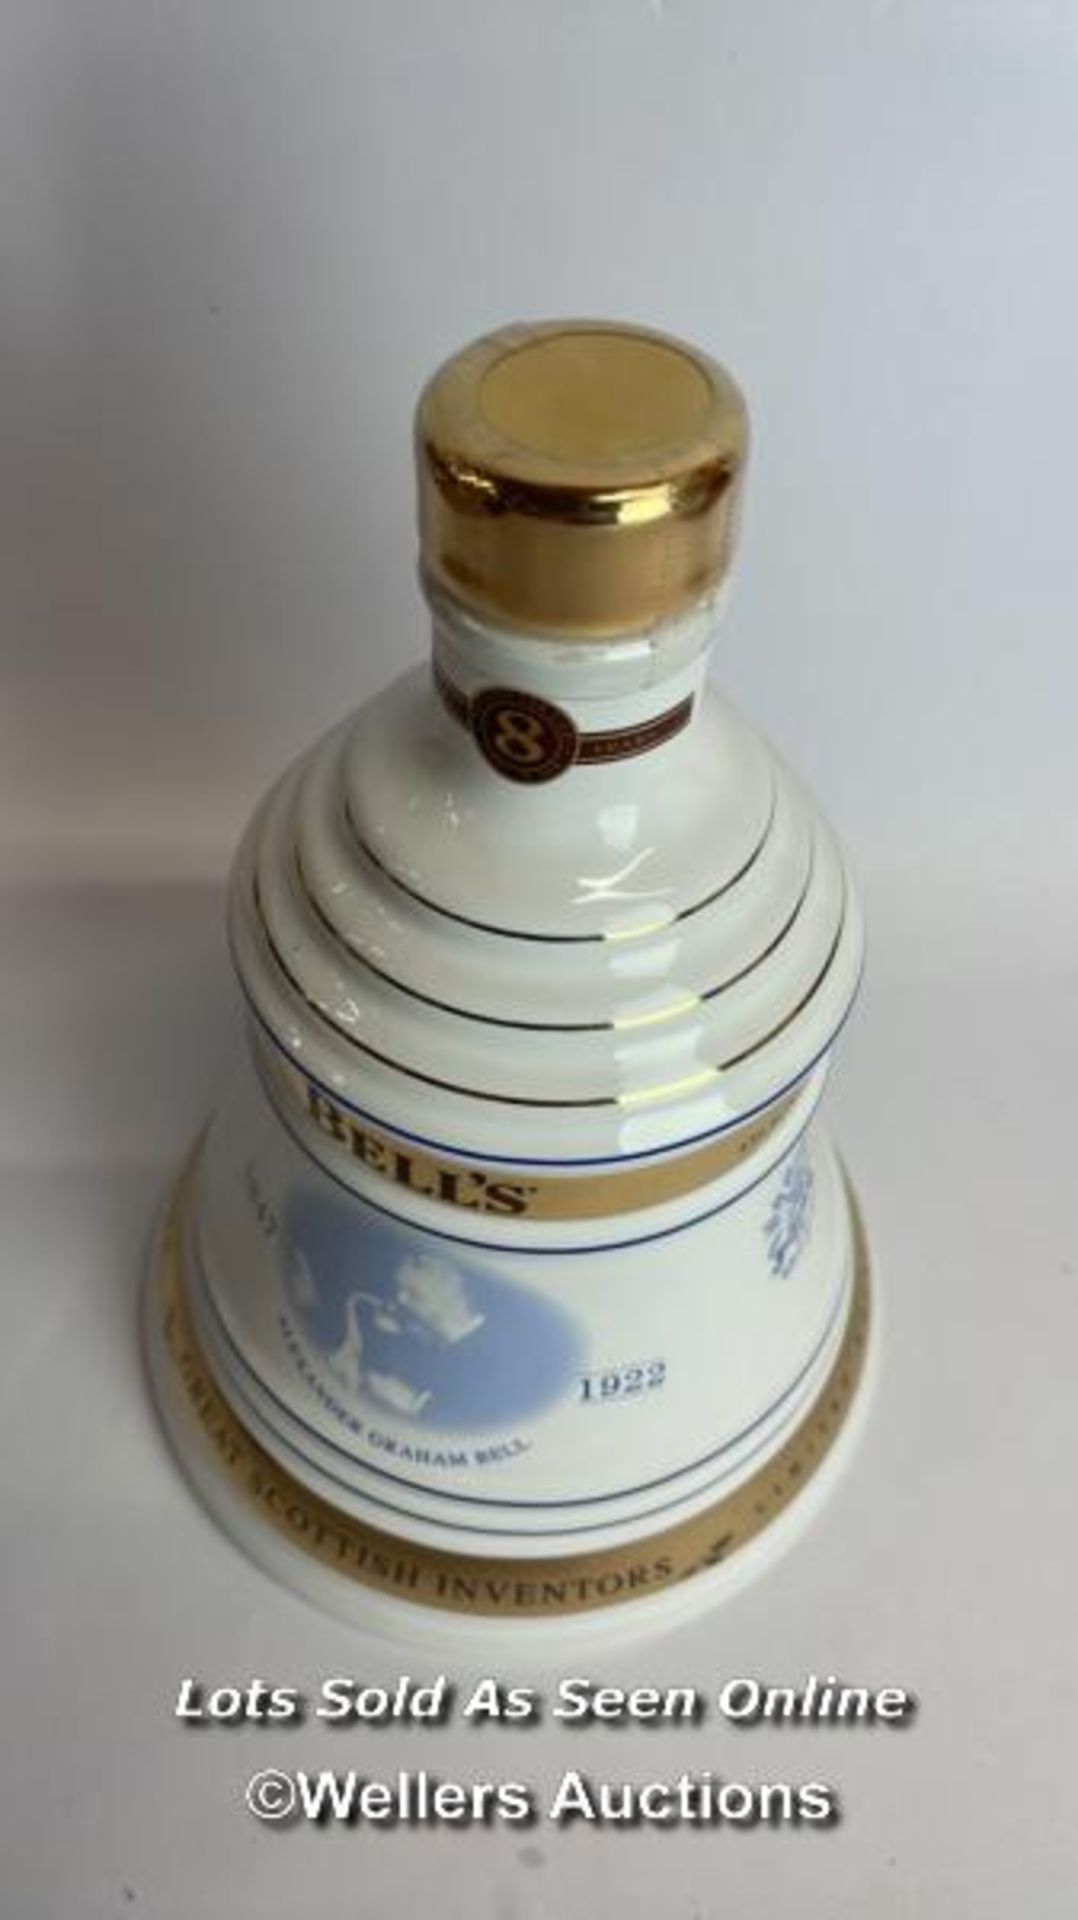 Bell's 2001 Old Scotch Whisky Limited Edition Christmas Decanter, Aged 8 Years, Brand New and Boxed, - Image 7 of 10